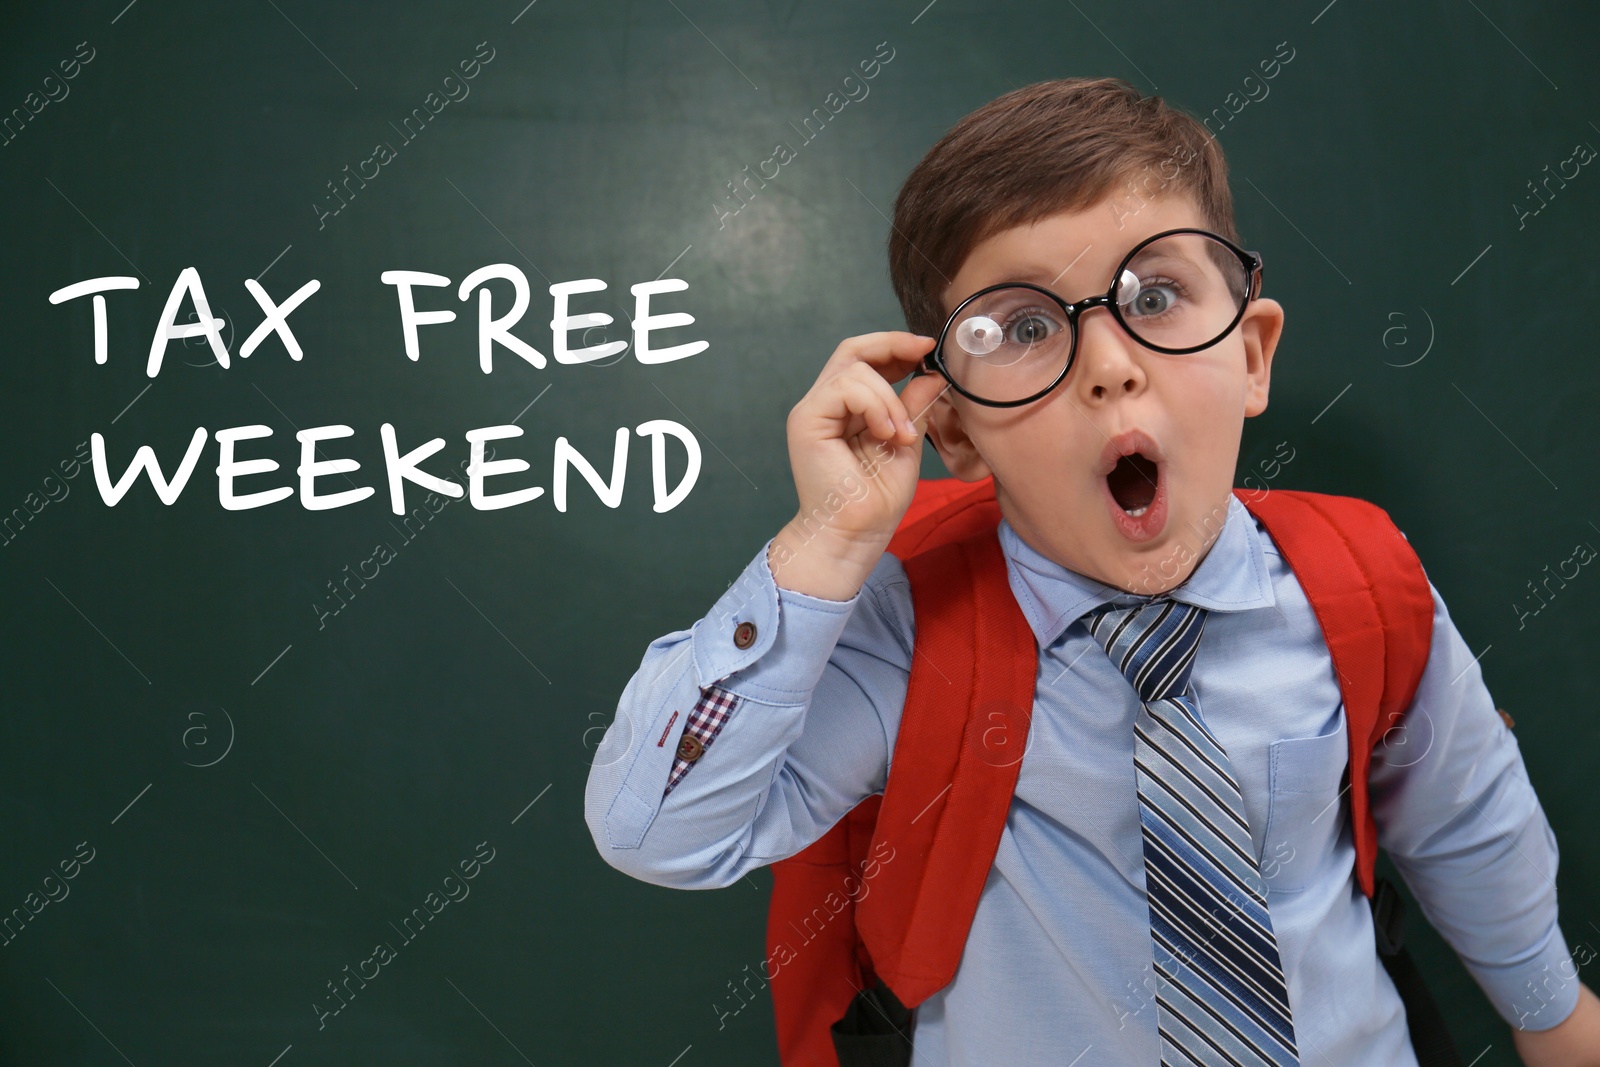 Image of Little boy with backpack and text TAX FREE WEEKEND written on chalkboard